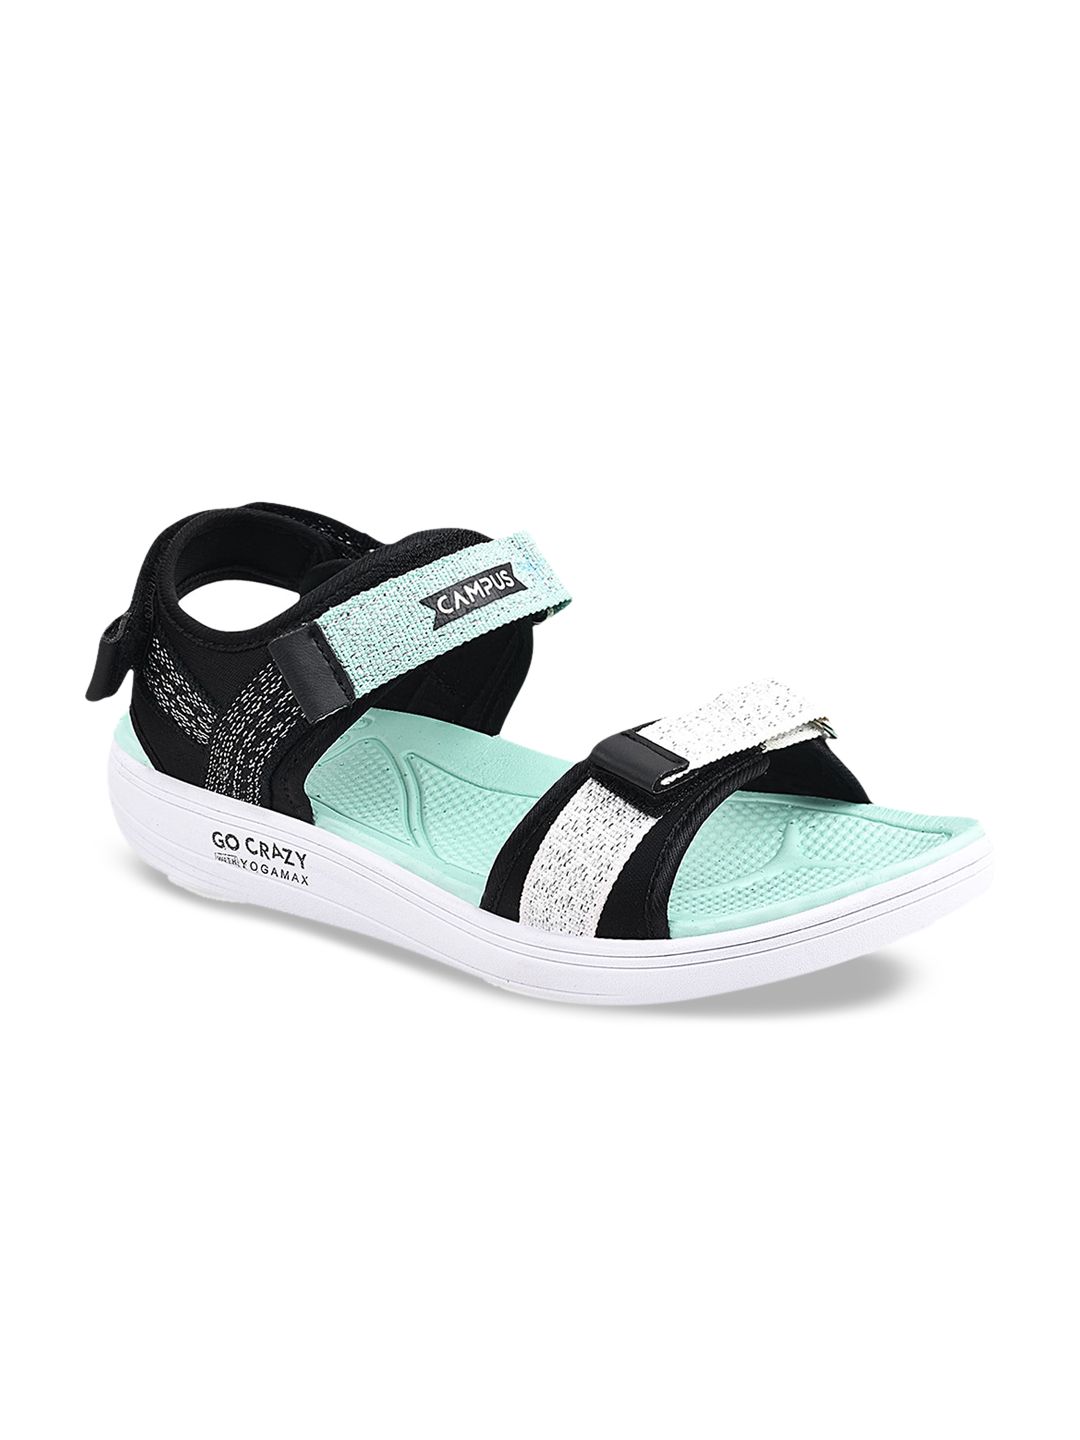 Campus Women Black & Off-White Sports Sandals Price in India